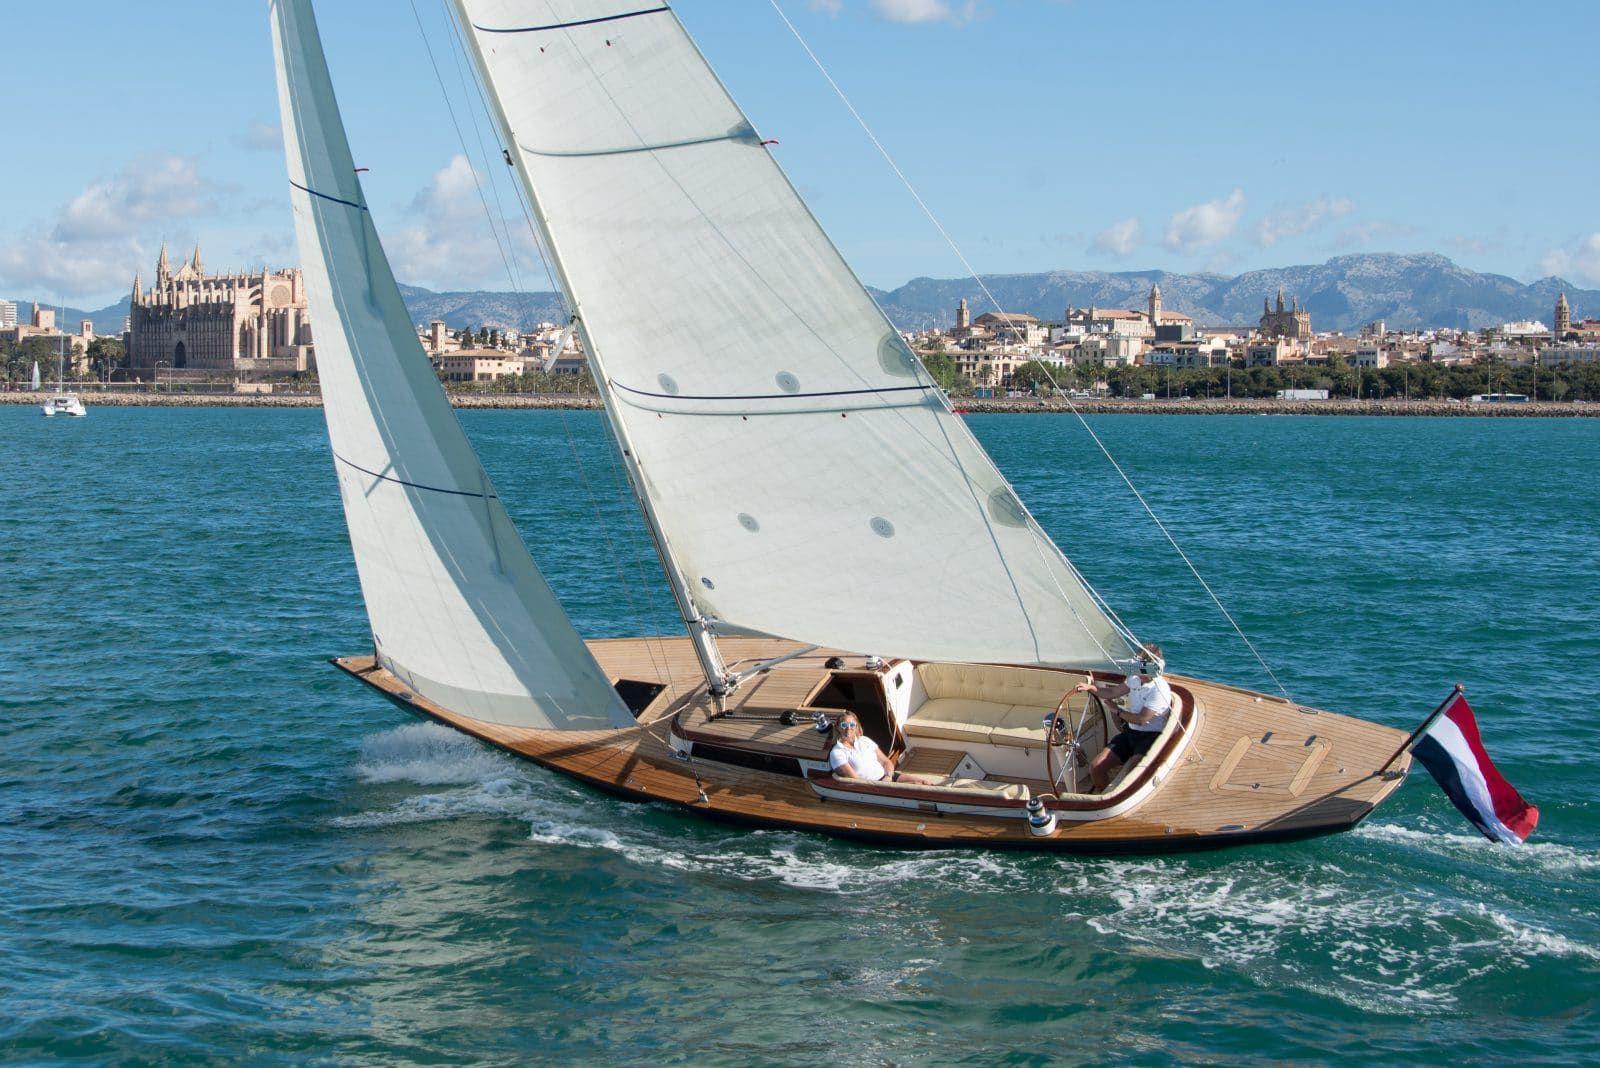 Eagle-38-daysailer-for-single-handed-sailing-with-all-controls-at-steering-position-1600x1068.jpg